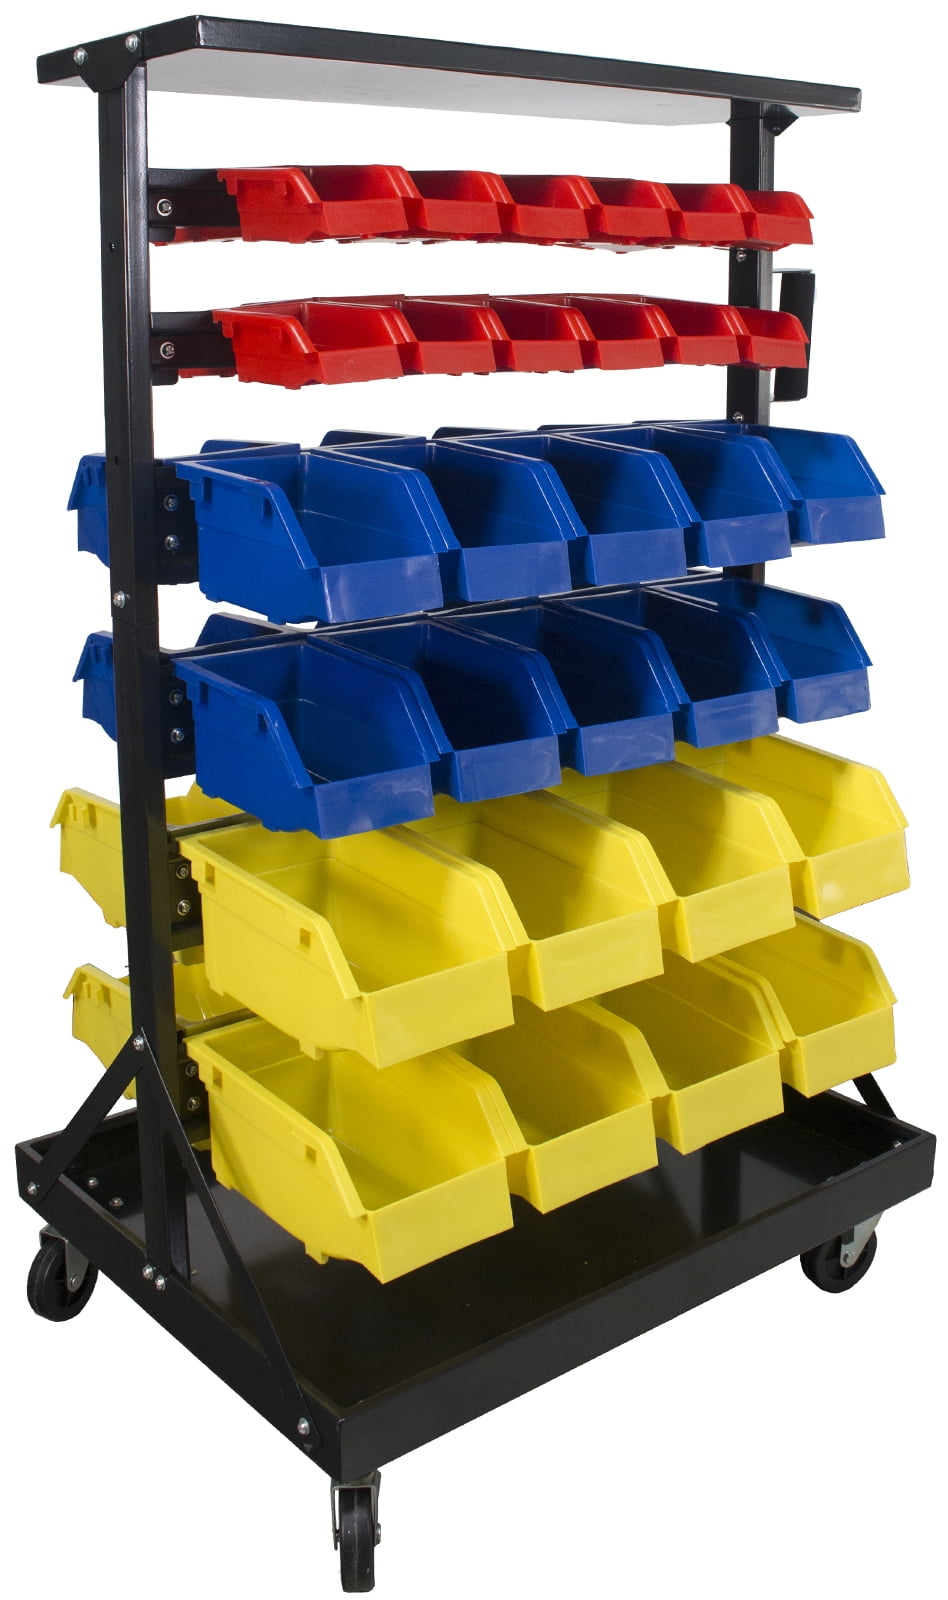 Double Sided Parts Rack Storage Shelf Organizer With 60 Removable Bins 